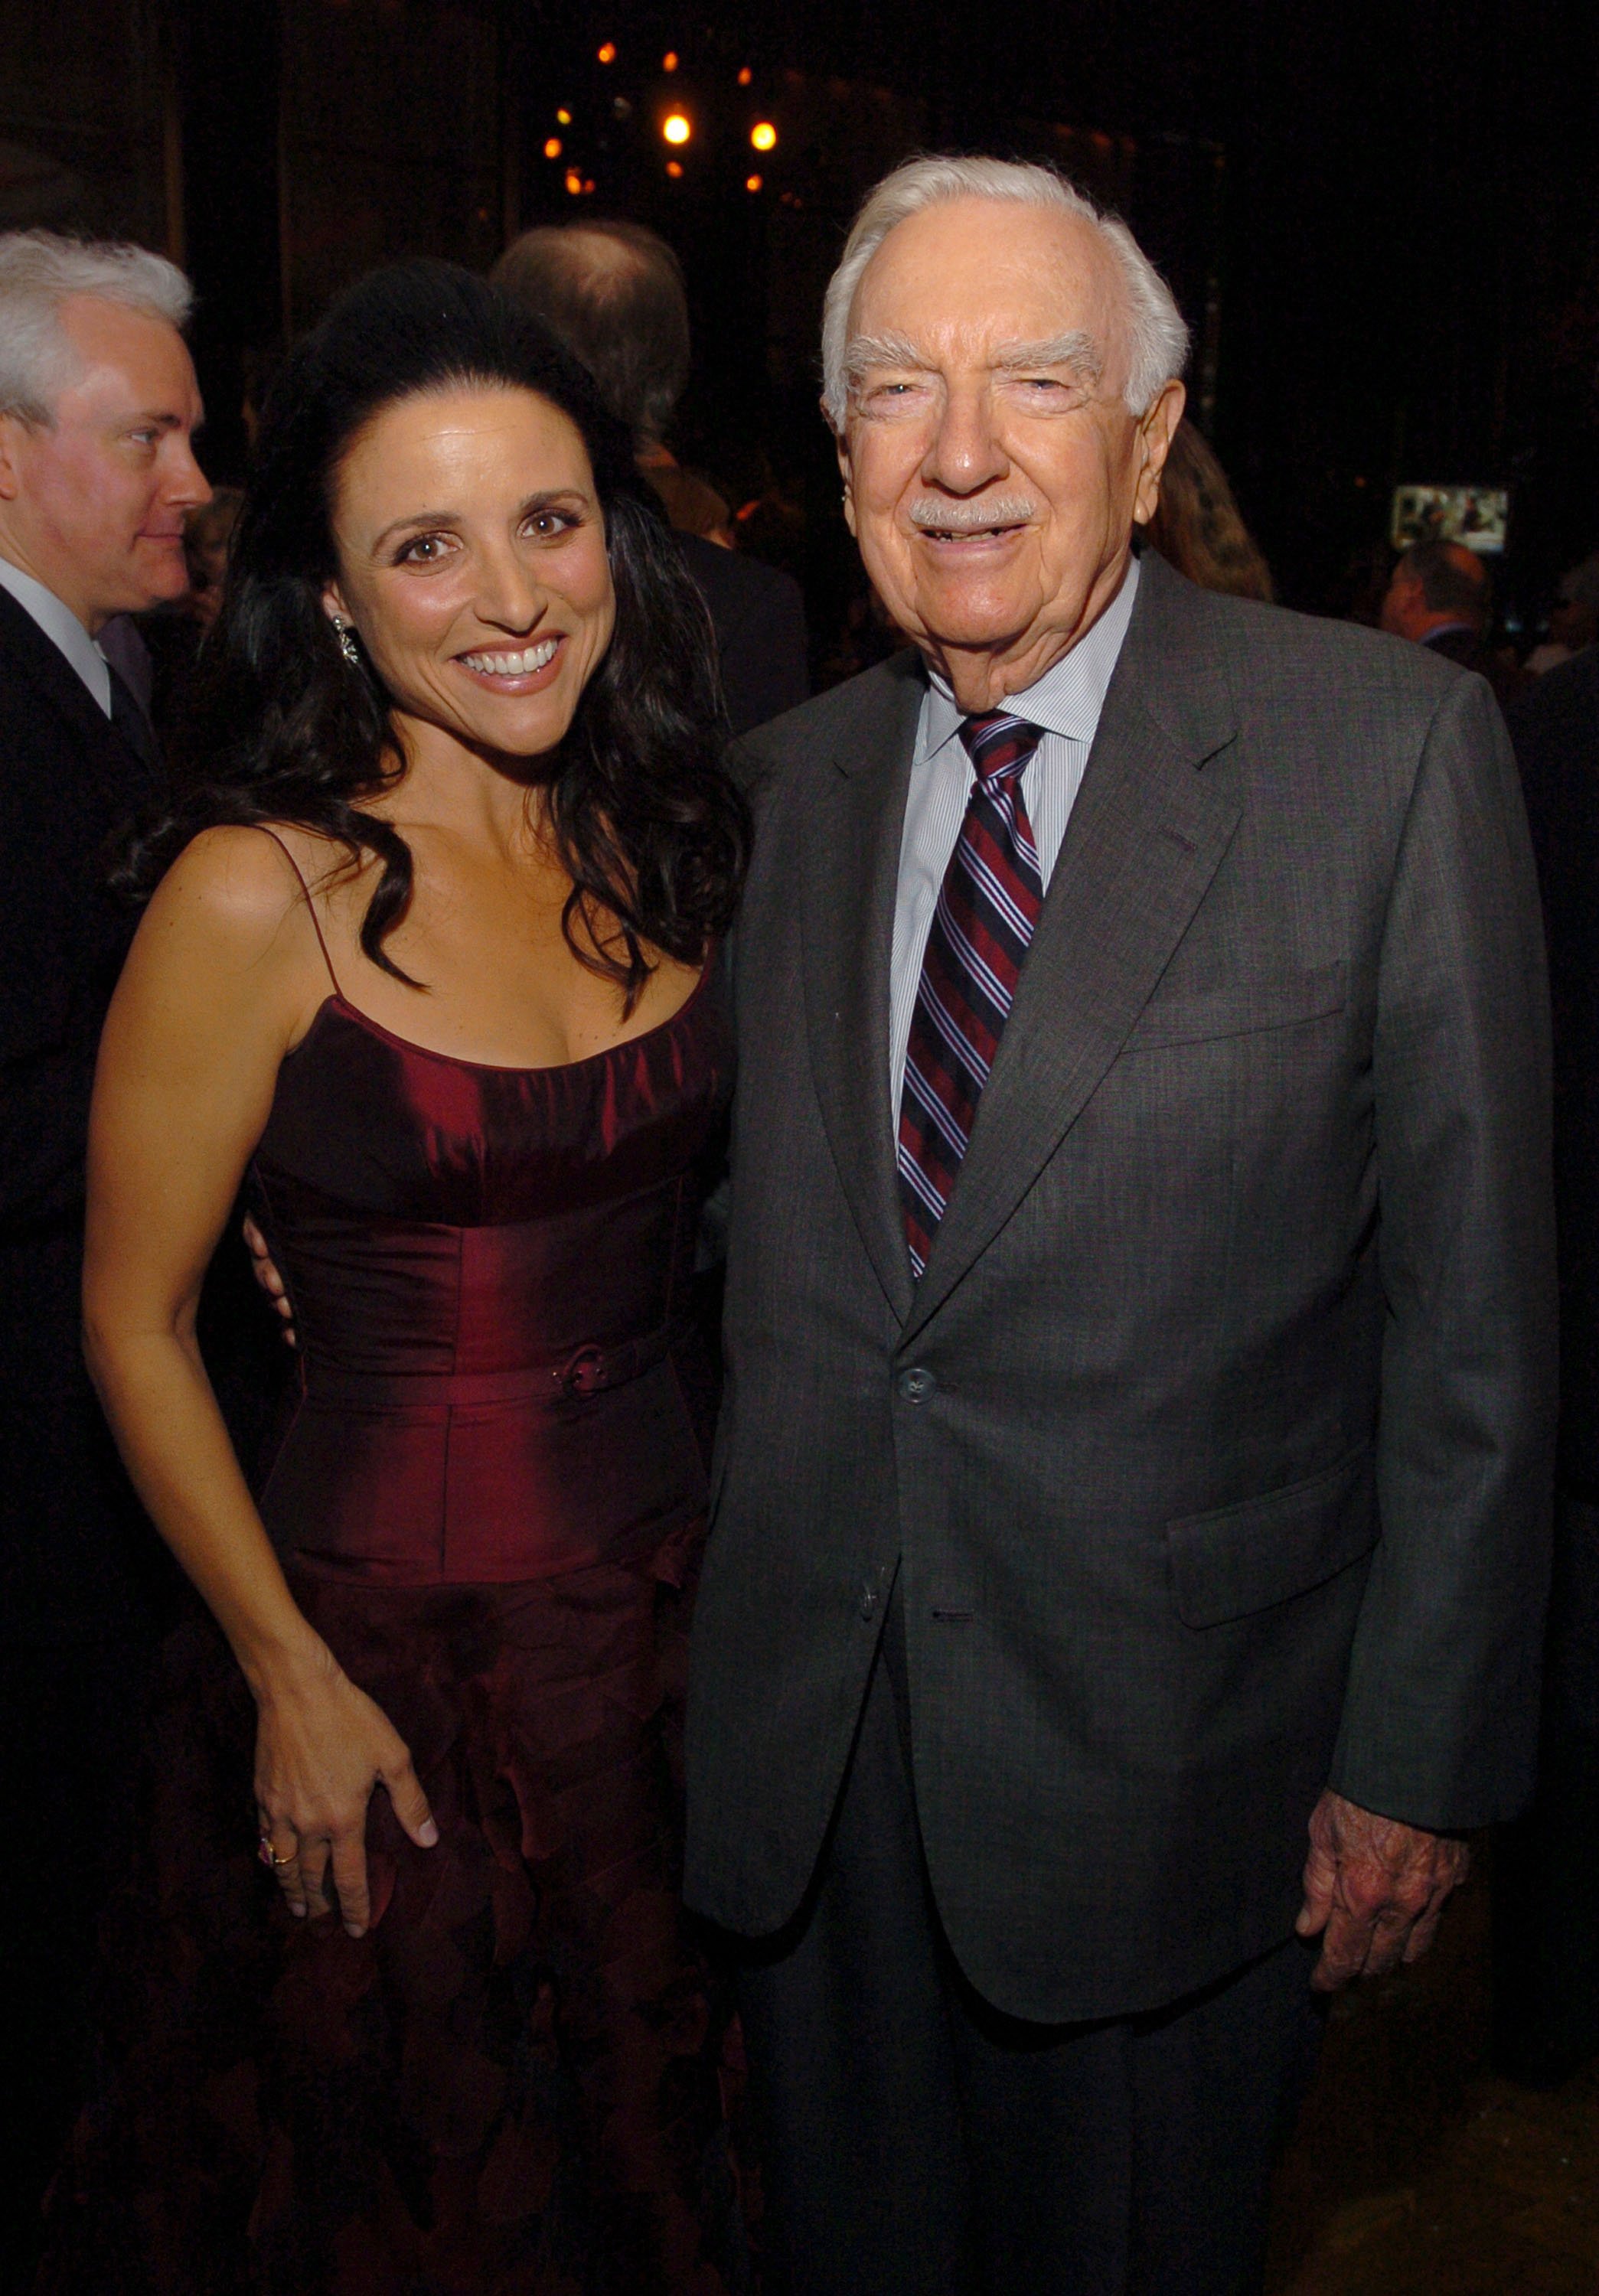 Julia Louis-Dreyfus and Walter Cronkite in New York City on November 17, 2004 | Source: Getty Images